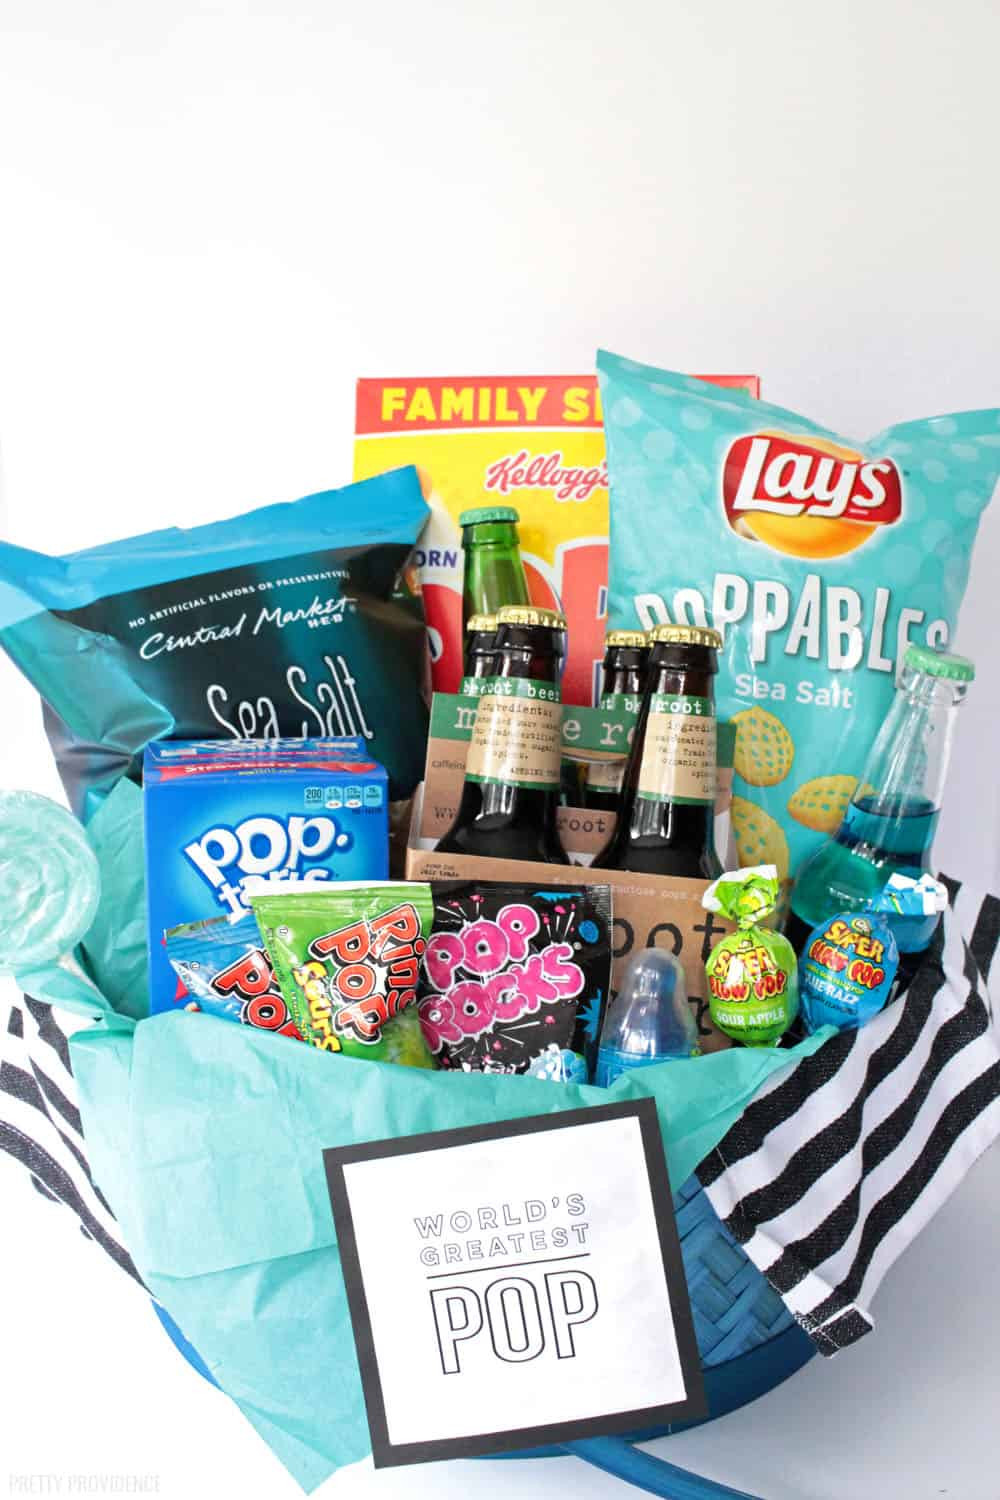 New Father Gift Ideas
 World s Greatest Pop Gift Basket New Dad Gift Idea